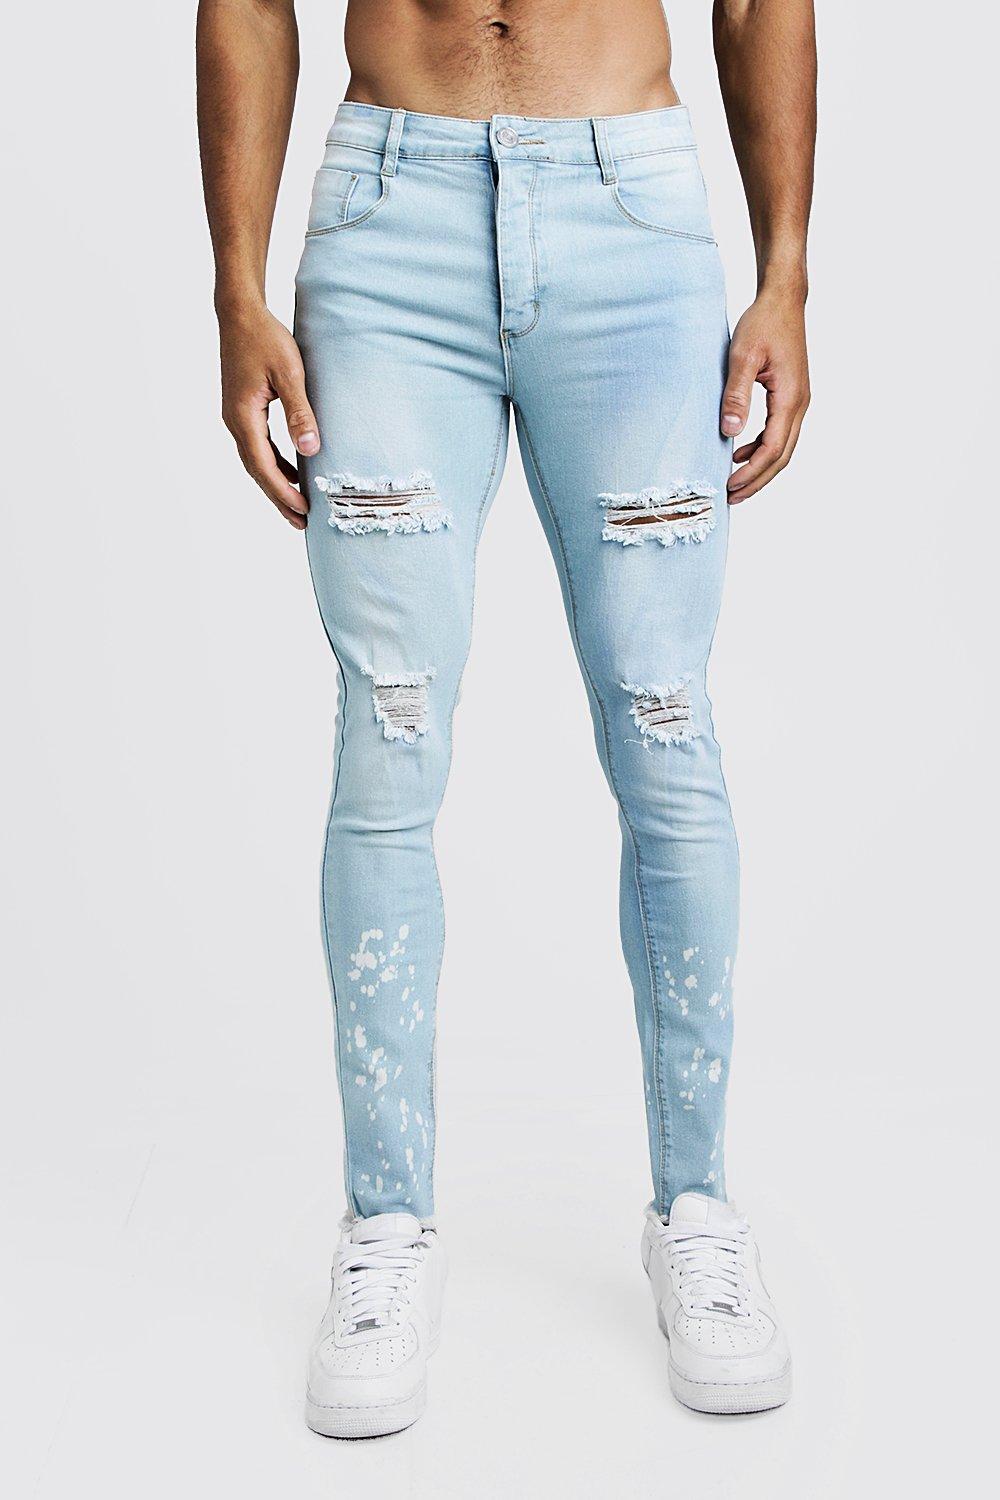 super holey jeans